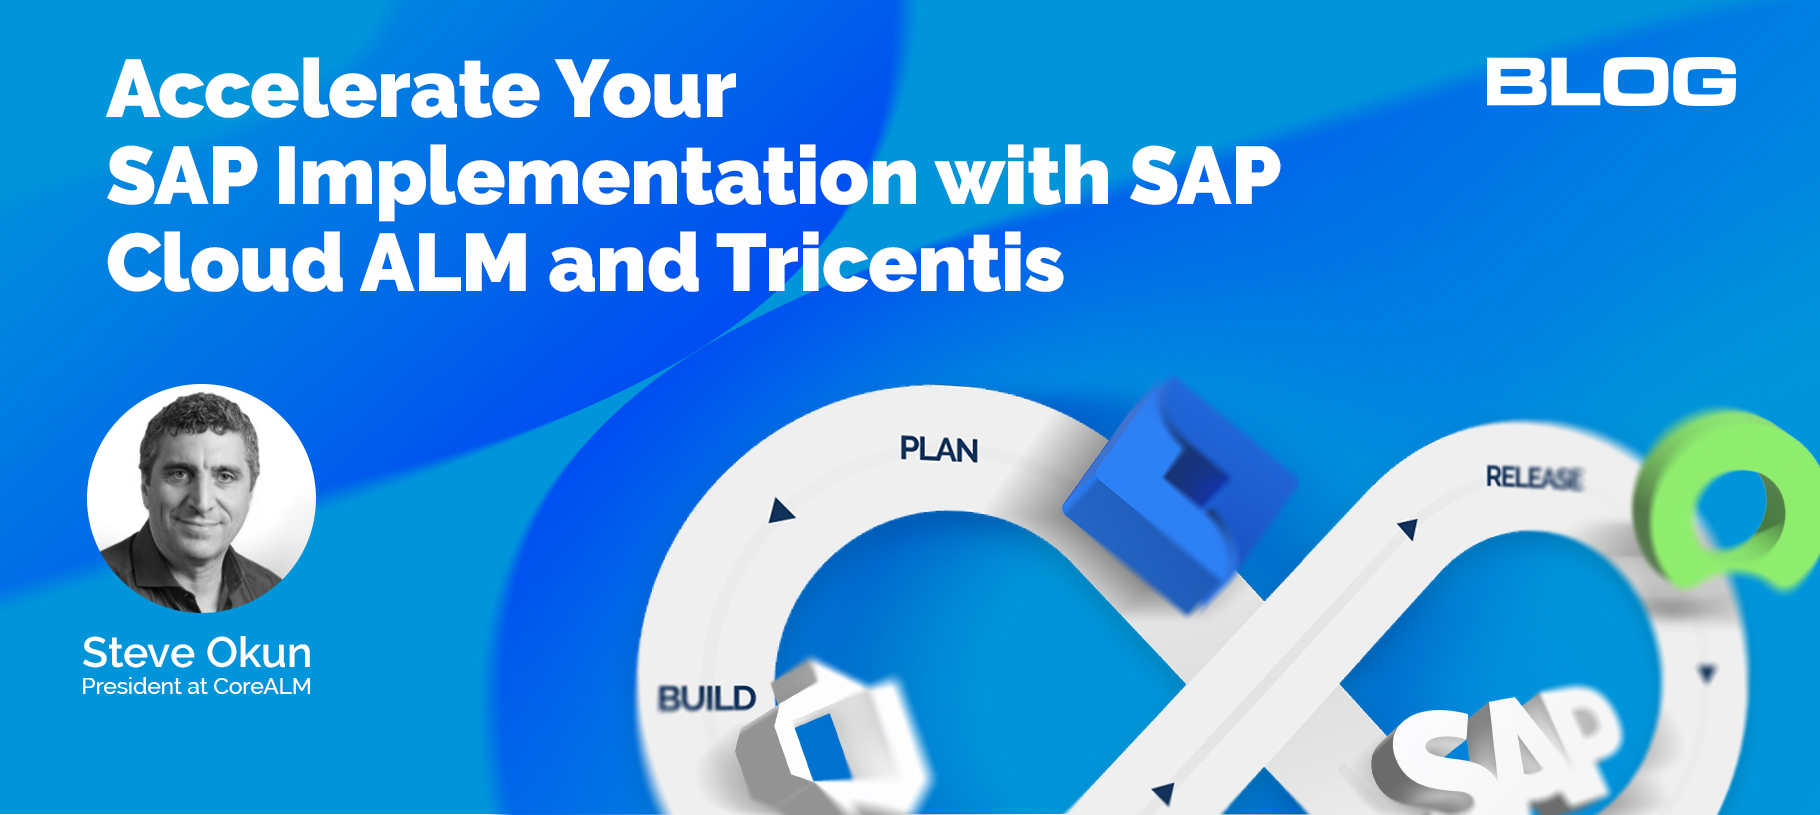 Accelerate Your SAP Implementation With SAP Cloud ALM And Tricentis